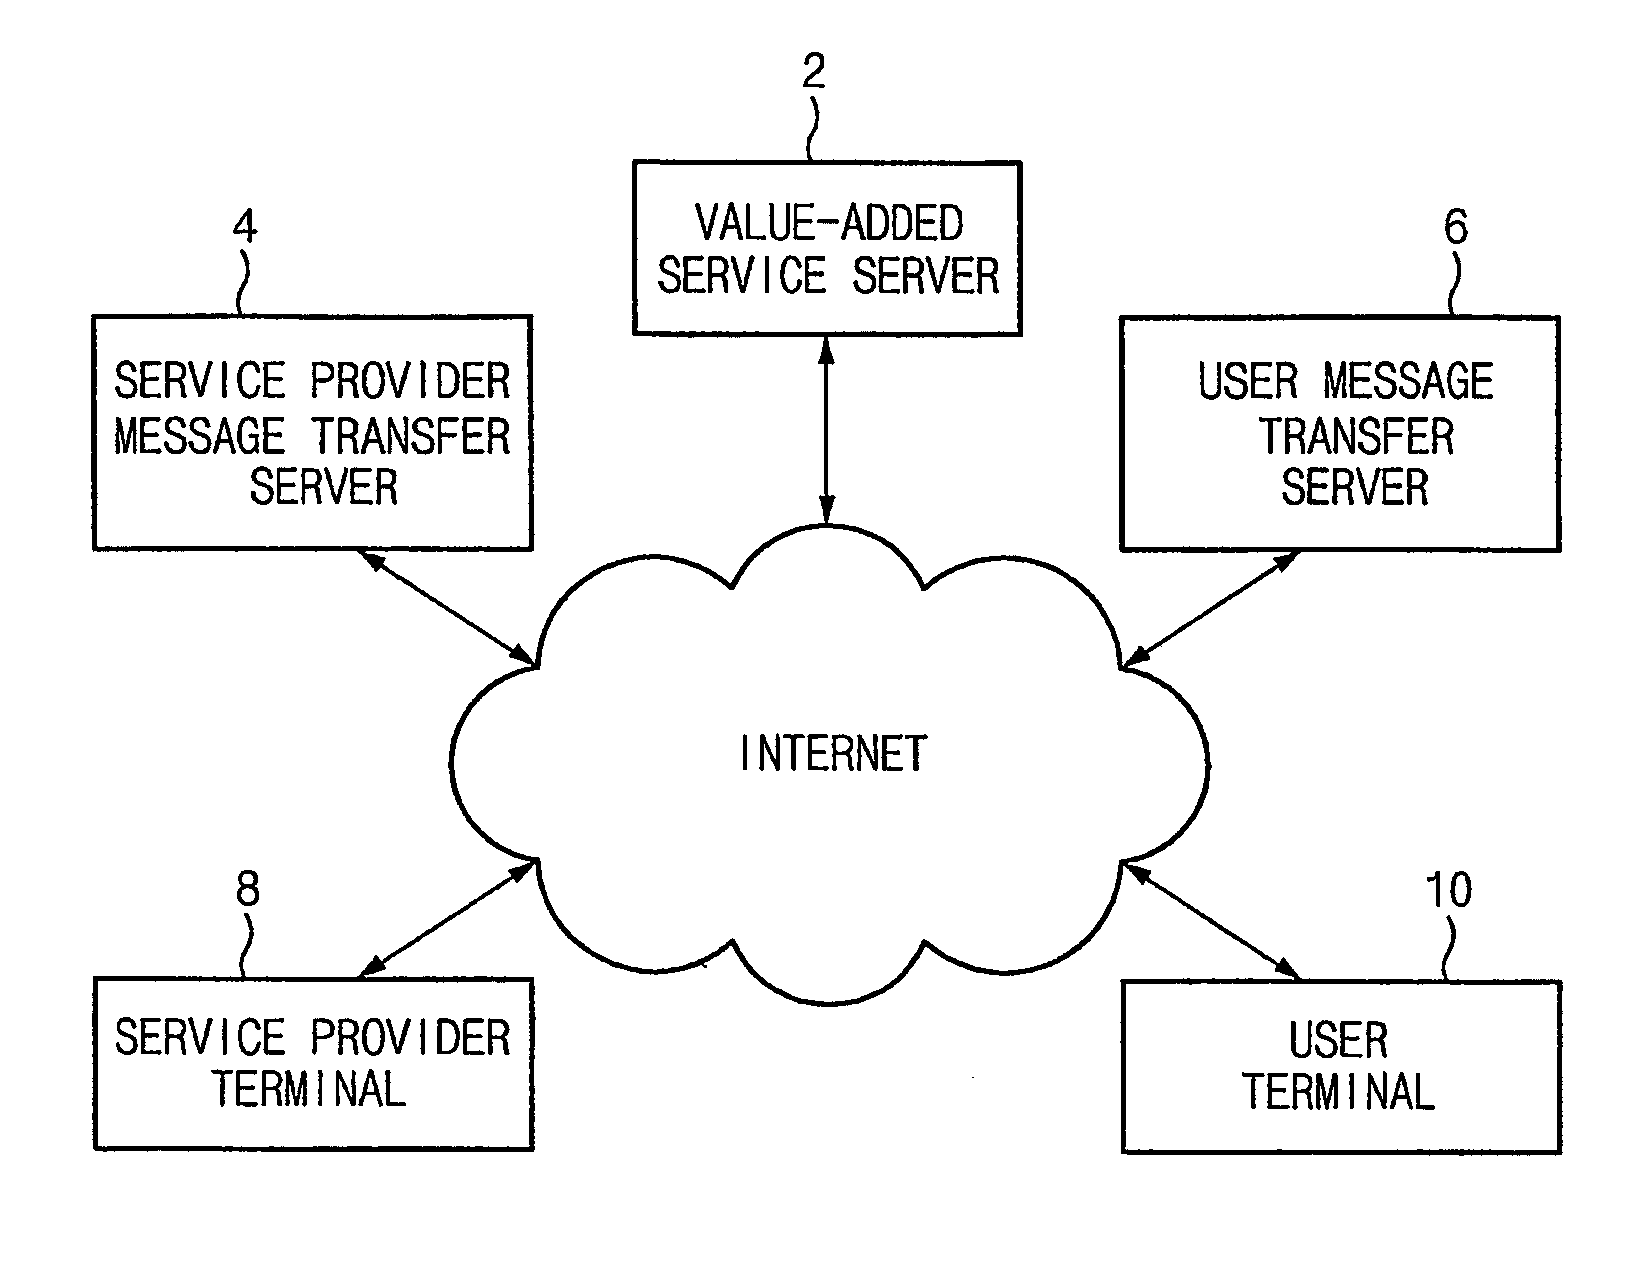 System and method for providing internet value-added service